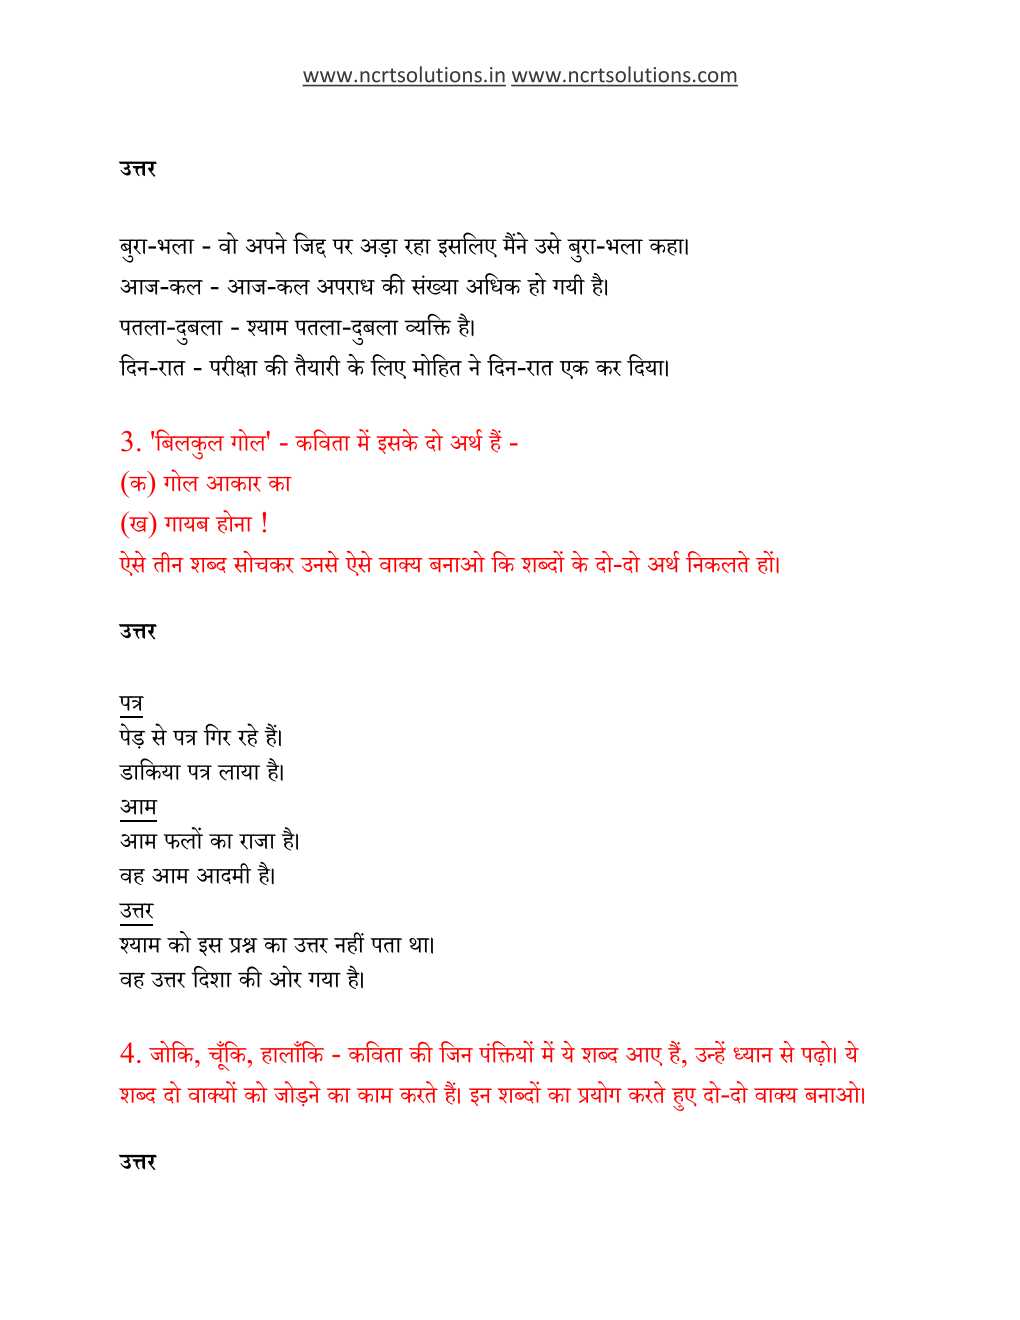 NCERT Solutions For Class 6 Hindi Vasant Chapter 4